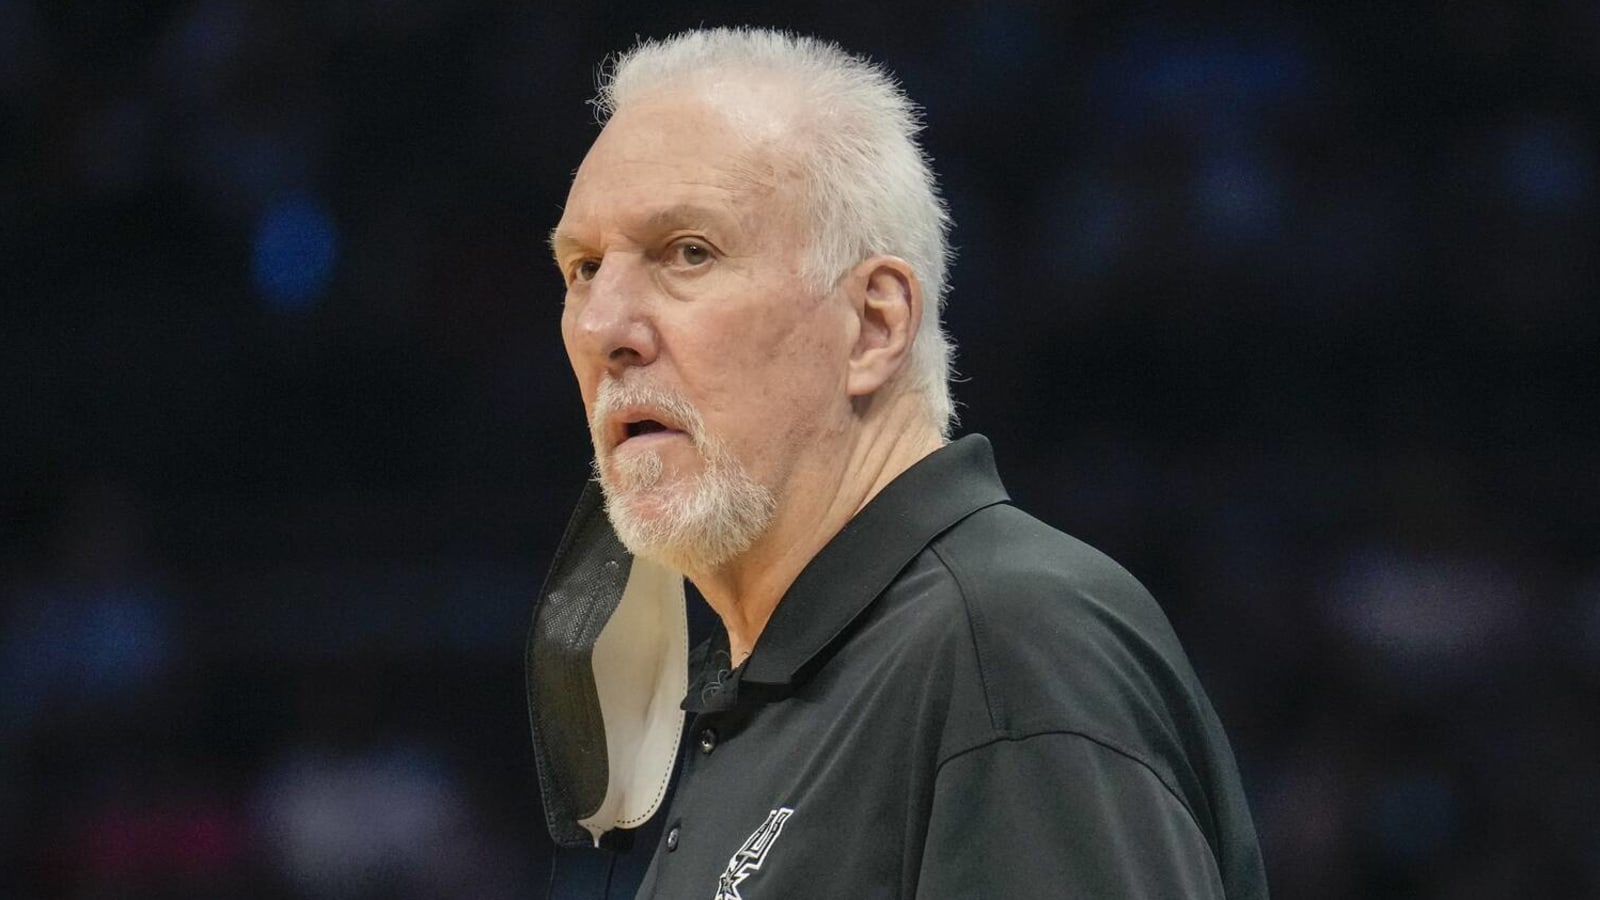 Gregg Popovich ties record for most wins as a head coach